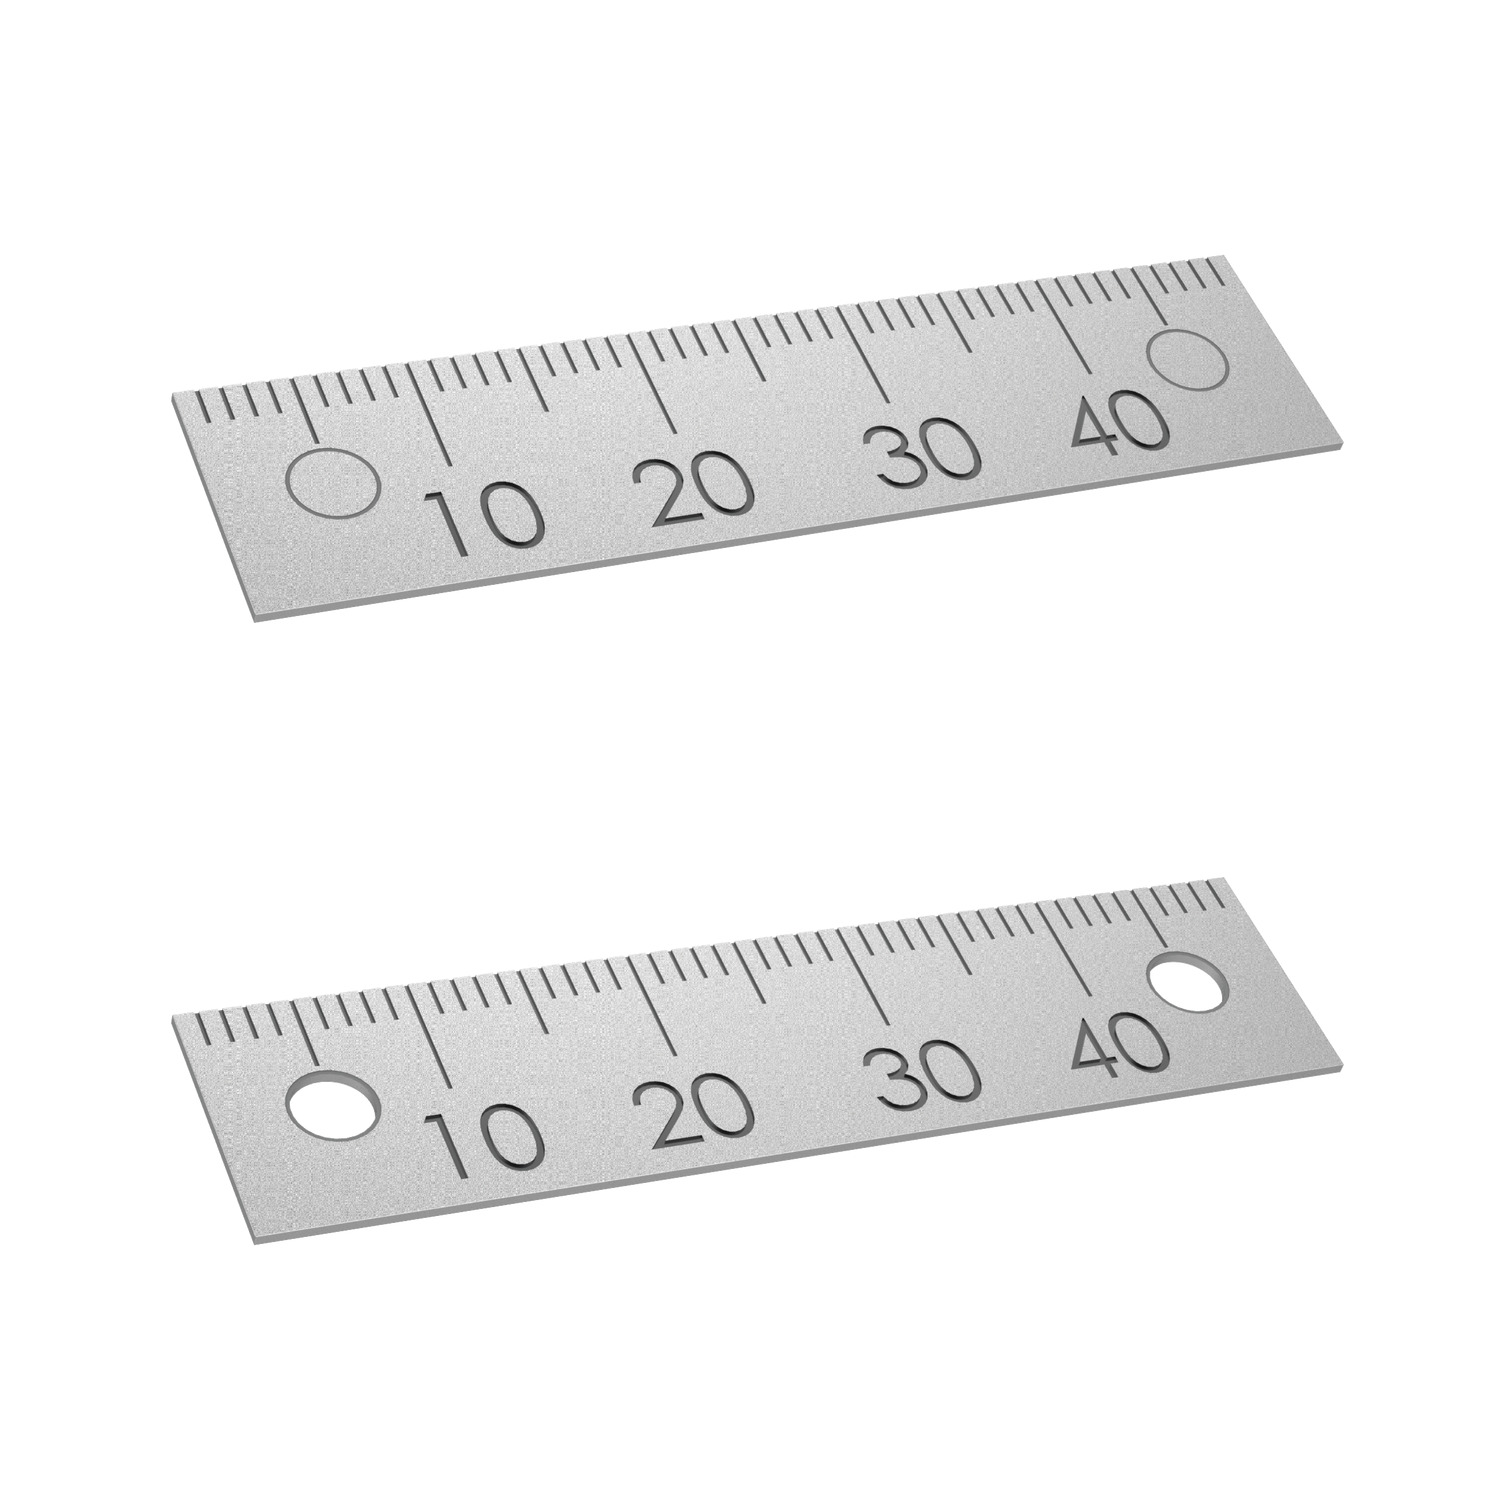 Scale Plates - Single Scale Aluminium scale plates for use with our sliding clamp one-touch fasteners. Etched markings are for indication and not precise measurement. Mount via adhesion onto clean surface.